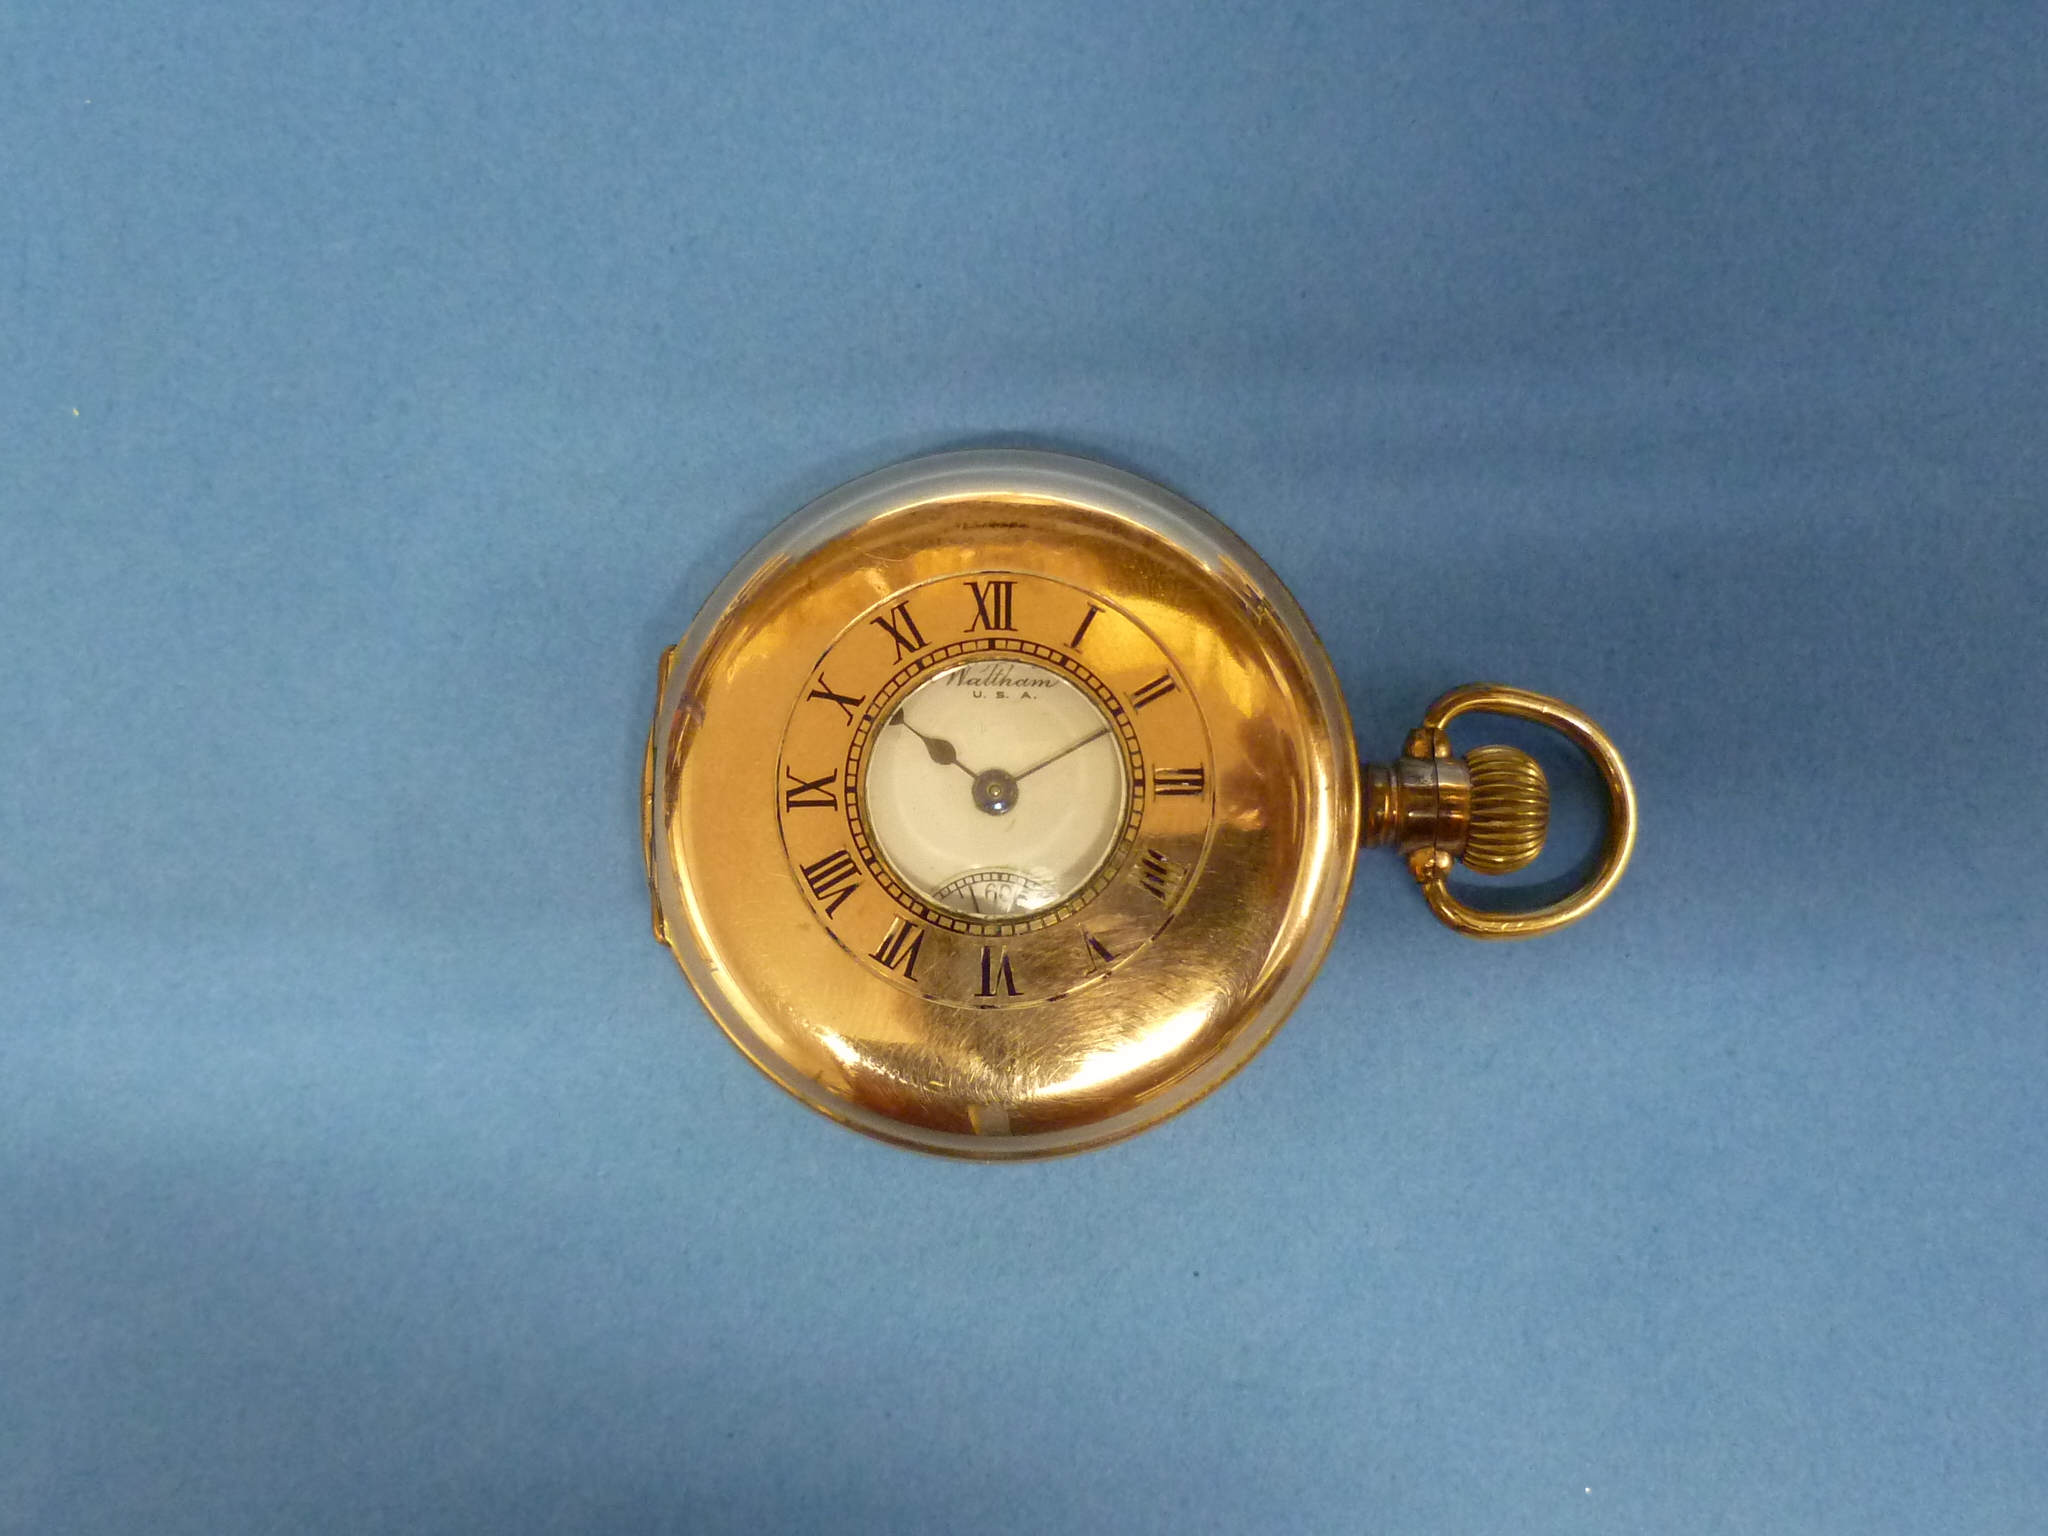 A gold-pated Waltham half-hunter Pocket Watch, the dial with black Roman numerals and subsidiary